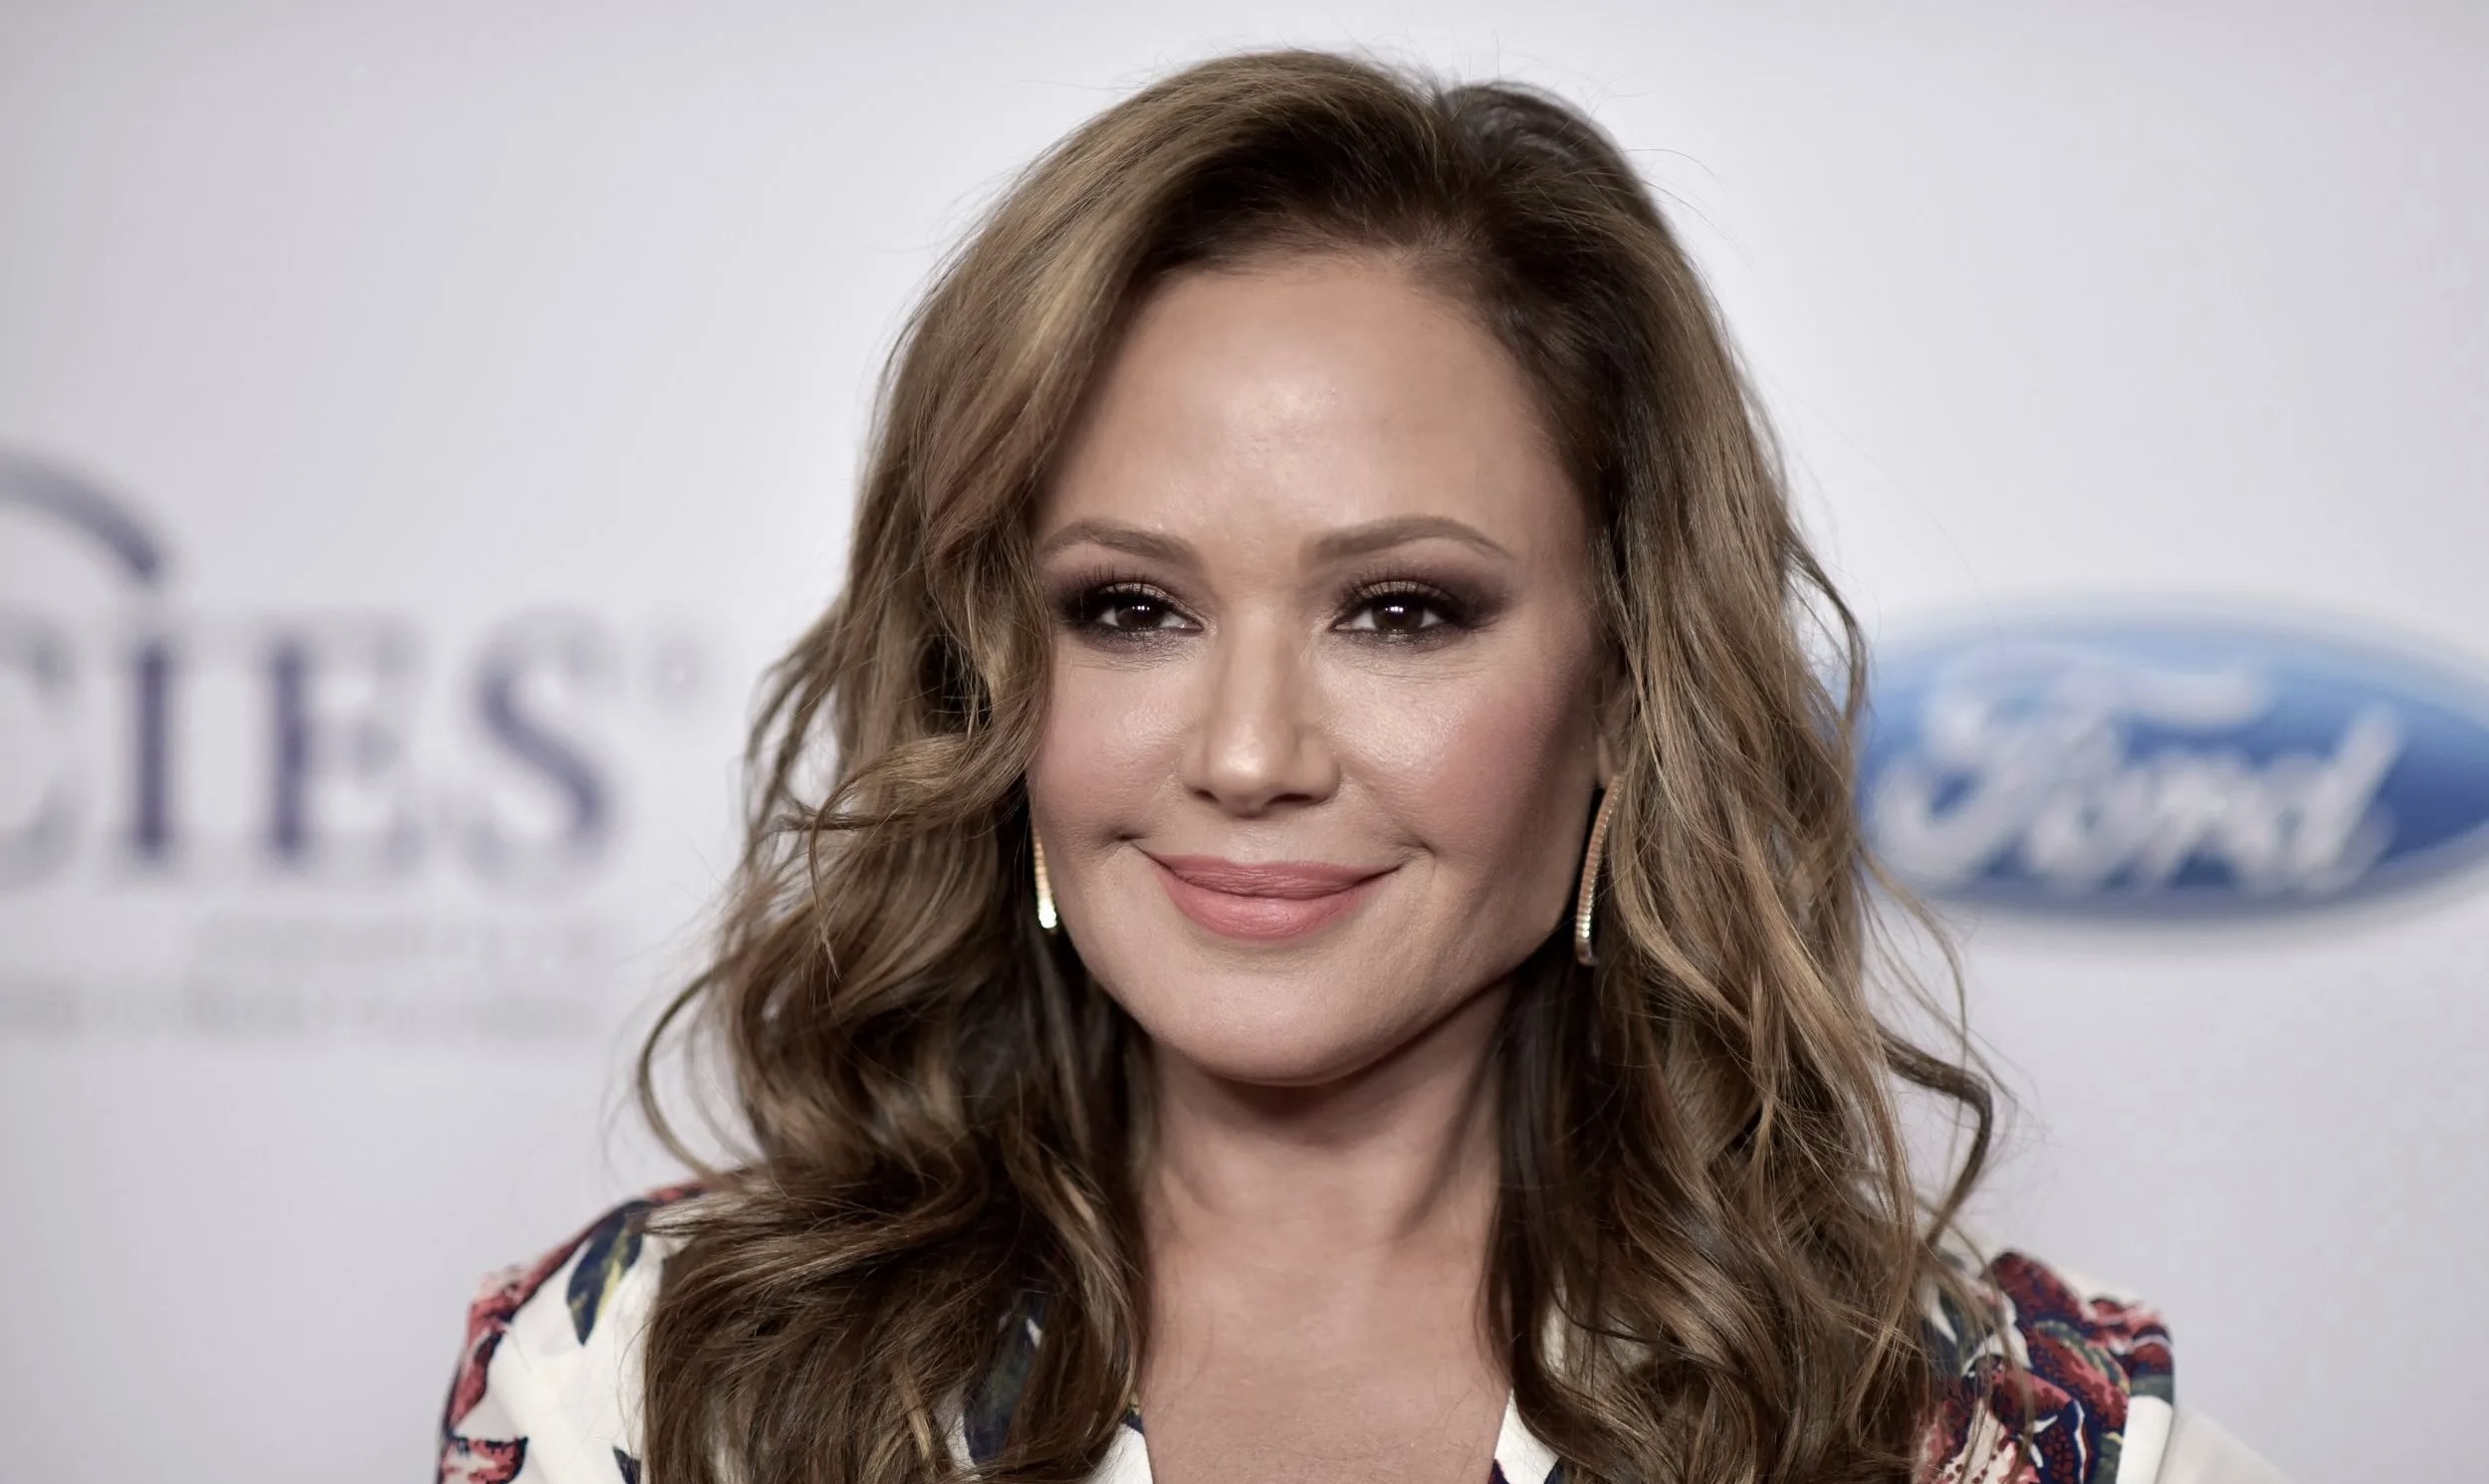 Leah Remini Sues Church of Scientology, Says She Is Victim of ‘Psychological Torture’